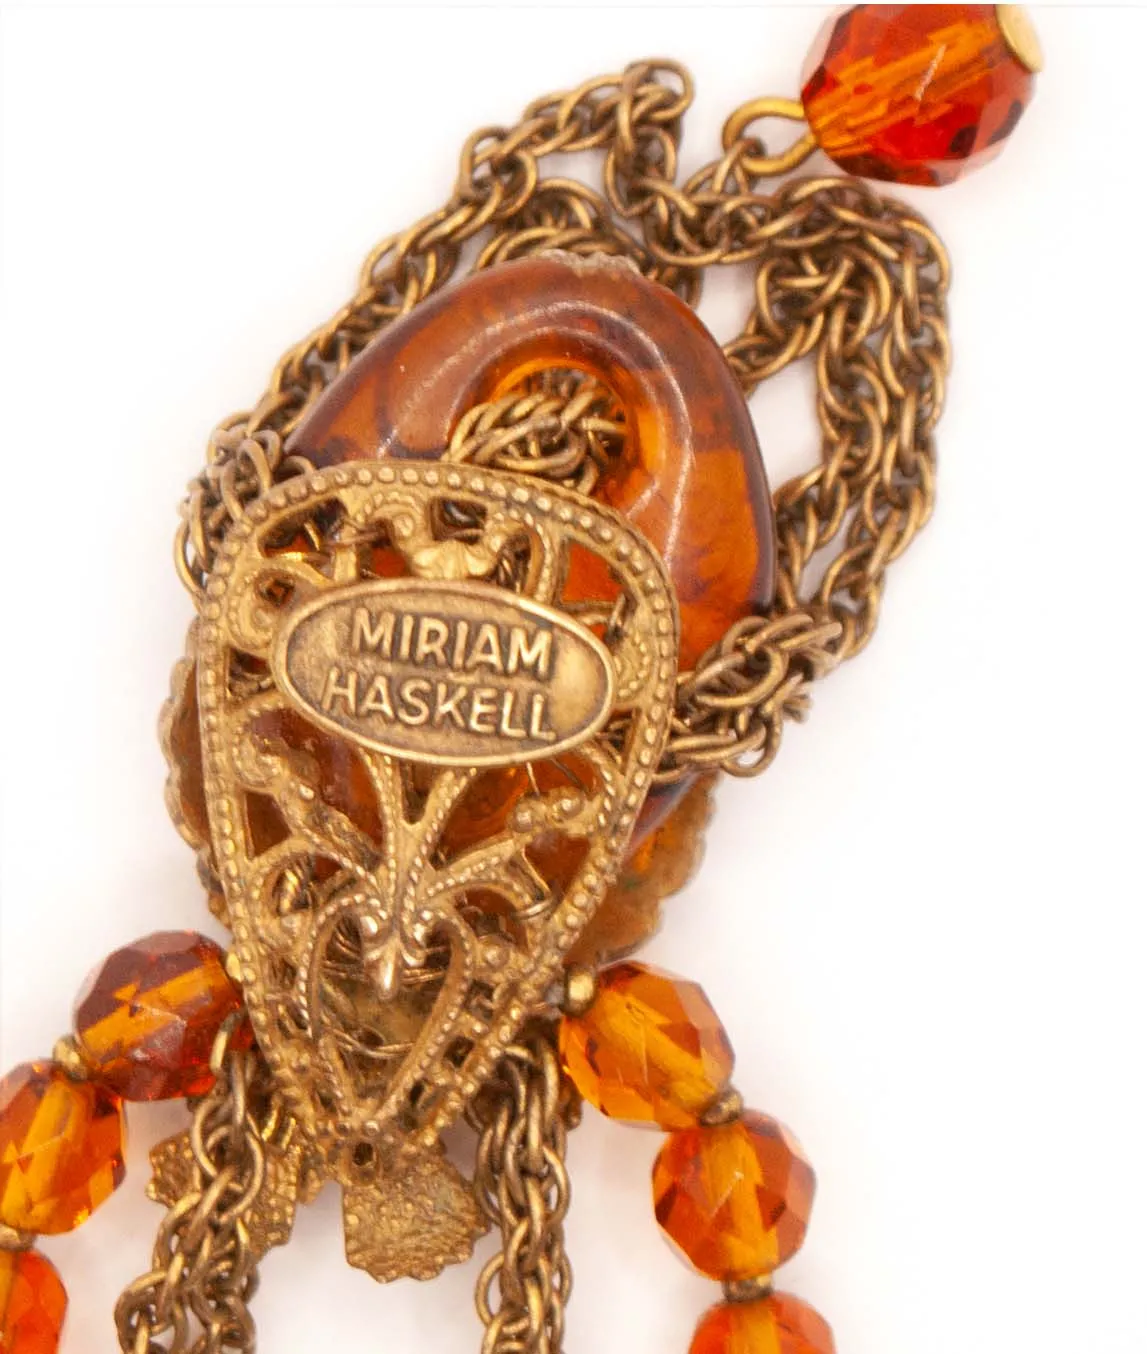 Miriam Haskell signature plaque on back of necklace pendant